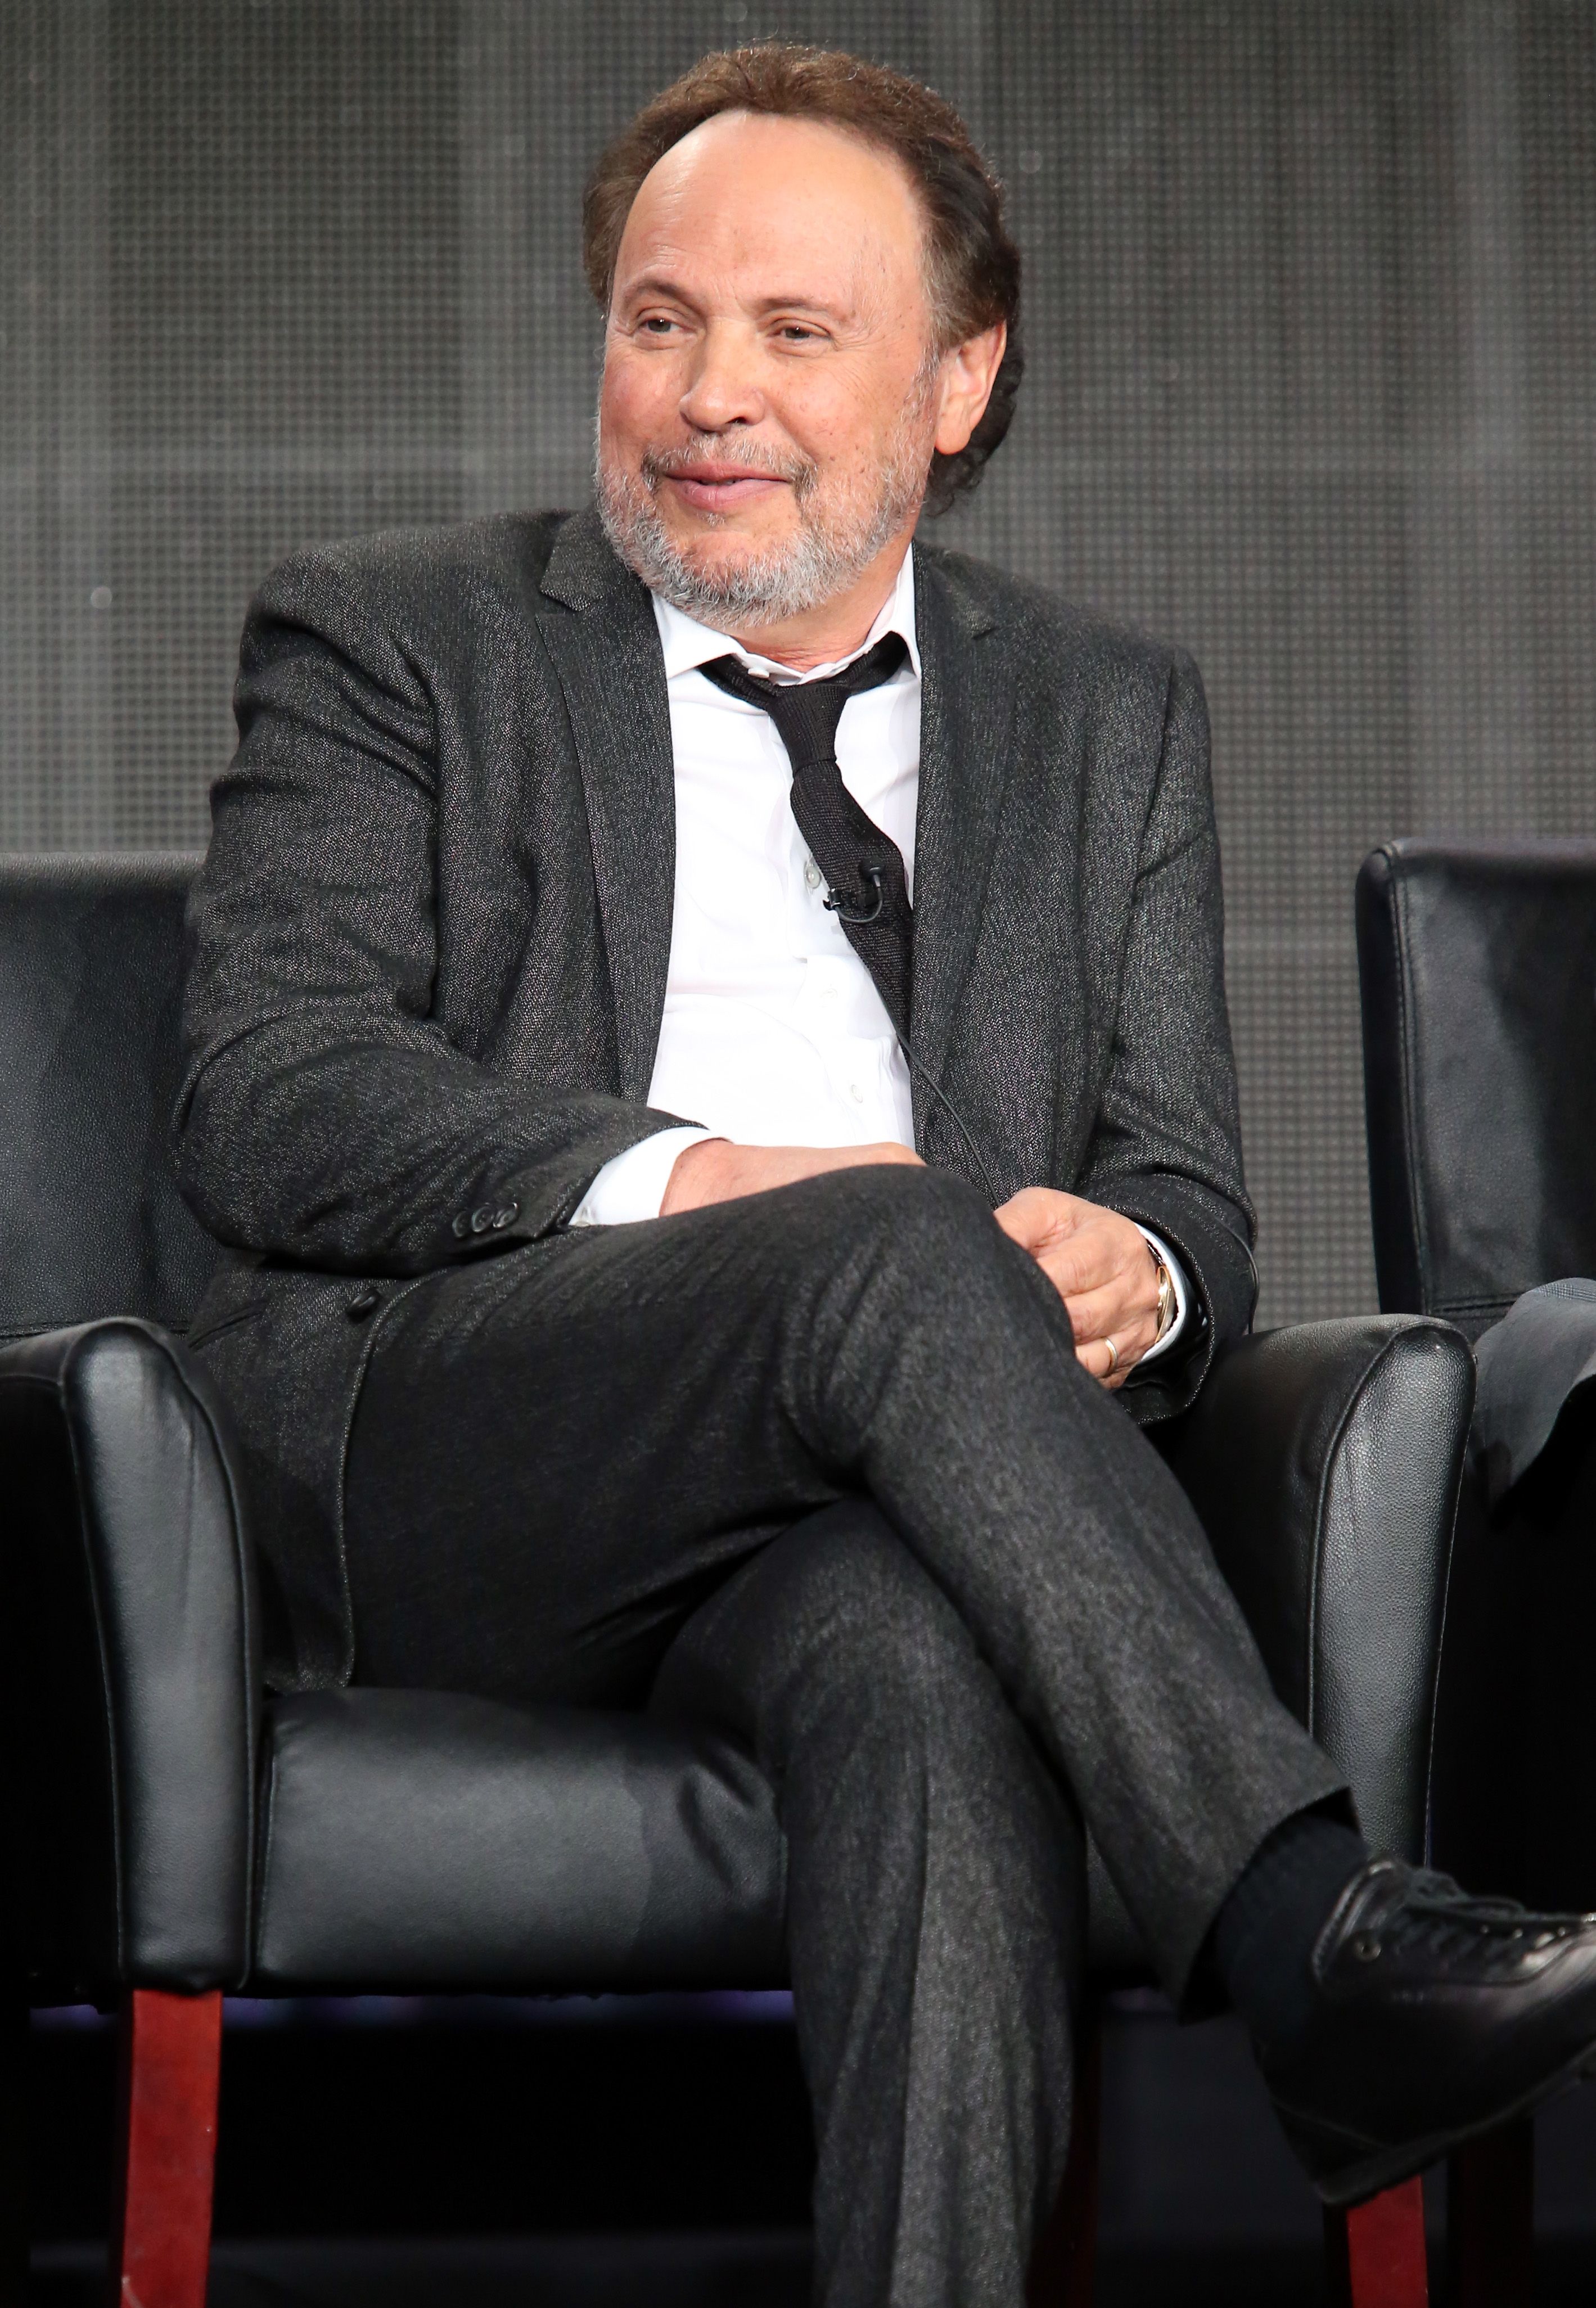 Billy Crystal onstage at the 'The Comedians' panel discussion during the Television Critics Association press tou rin 2015 in Pasadena, California | Source: Getty Images